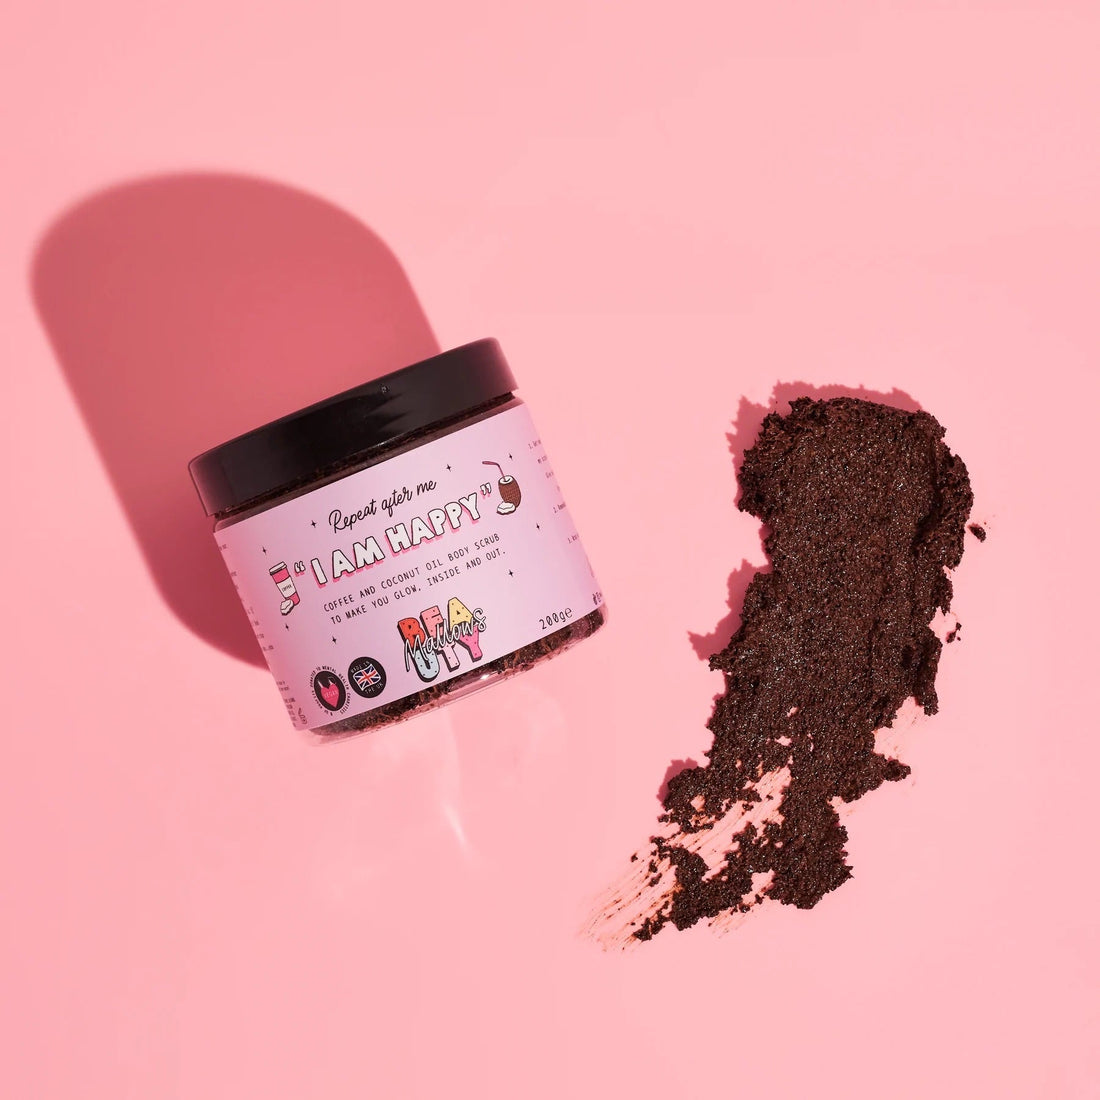 Shop Mallows Beauty Coconut &amp; Coffee Body Scrub - Premium Beauty Kit from Mallows Beauty Online now at Spoiled Brat 